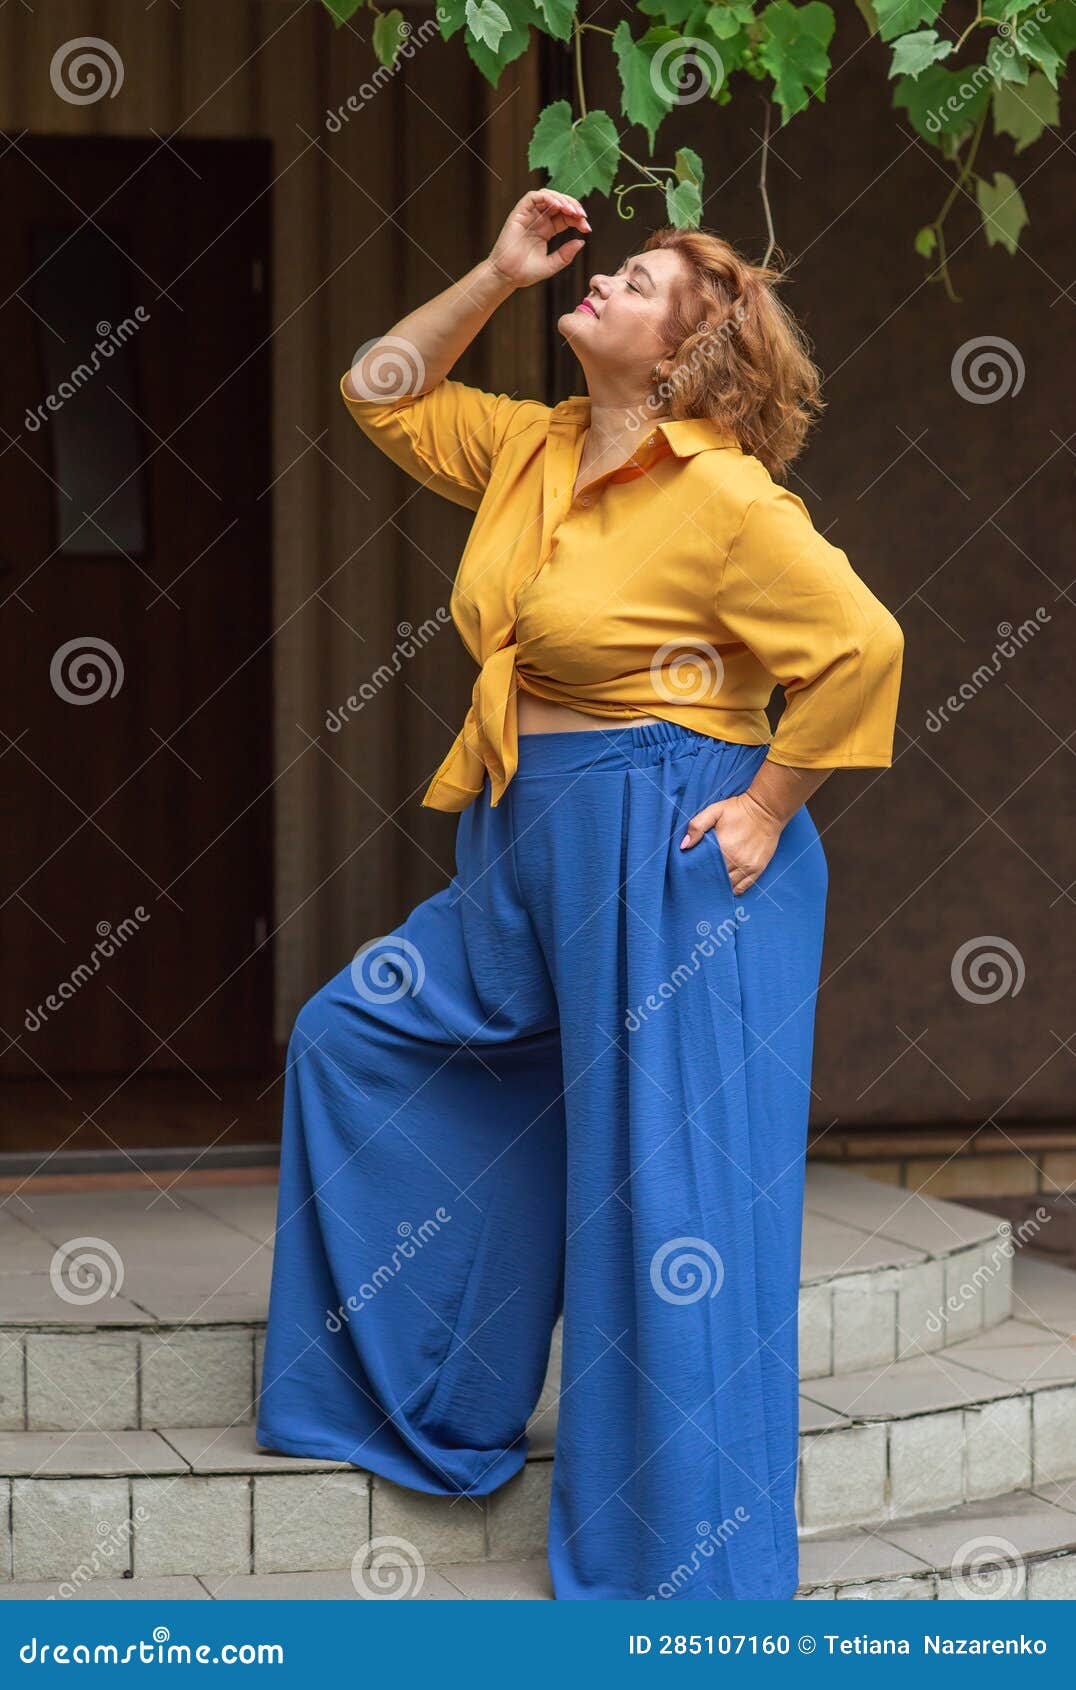 Plump Lady in Fashionable Clothes, Woman of 50-55 Years Old Stock